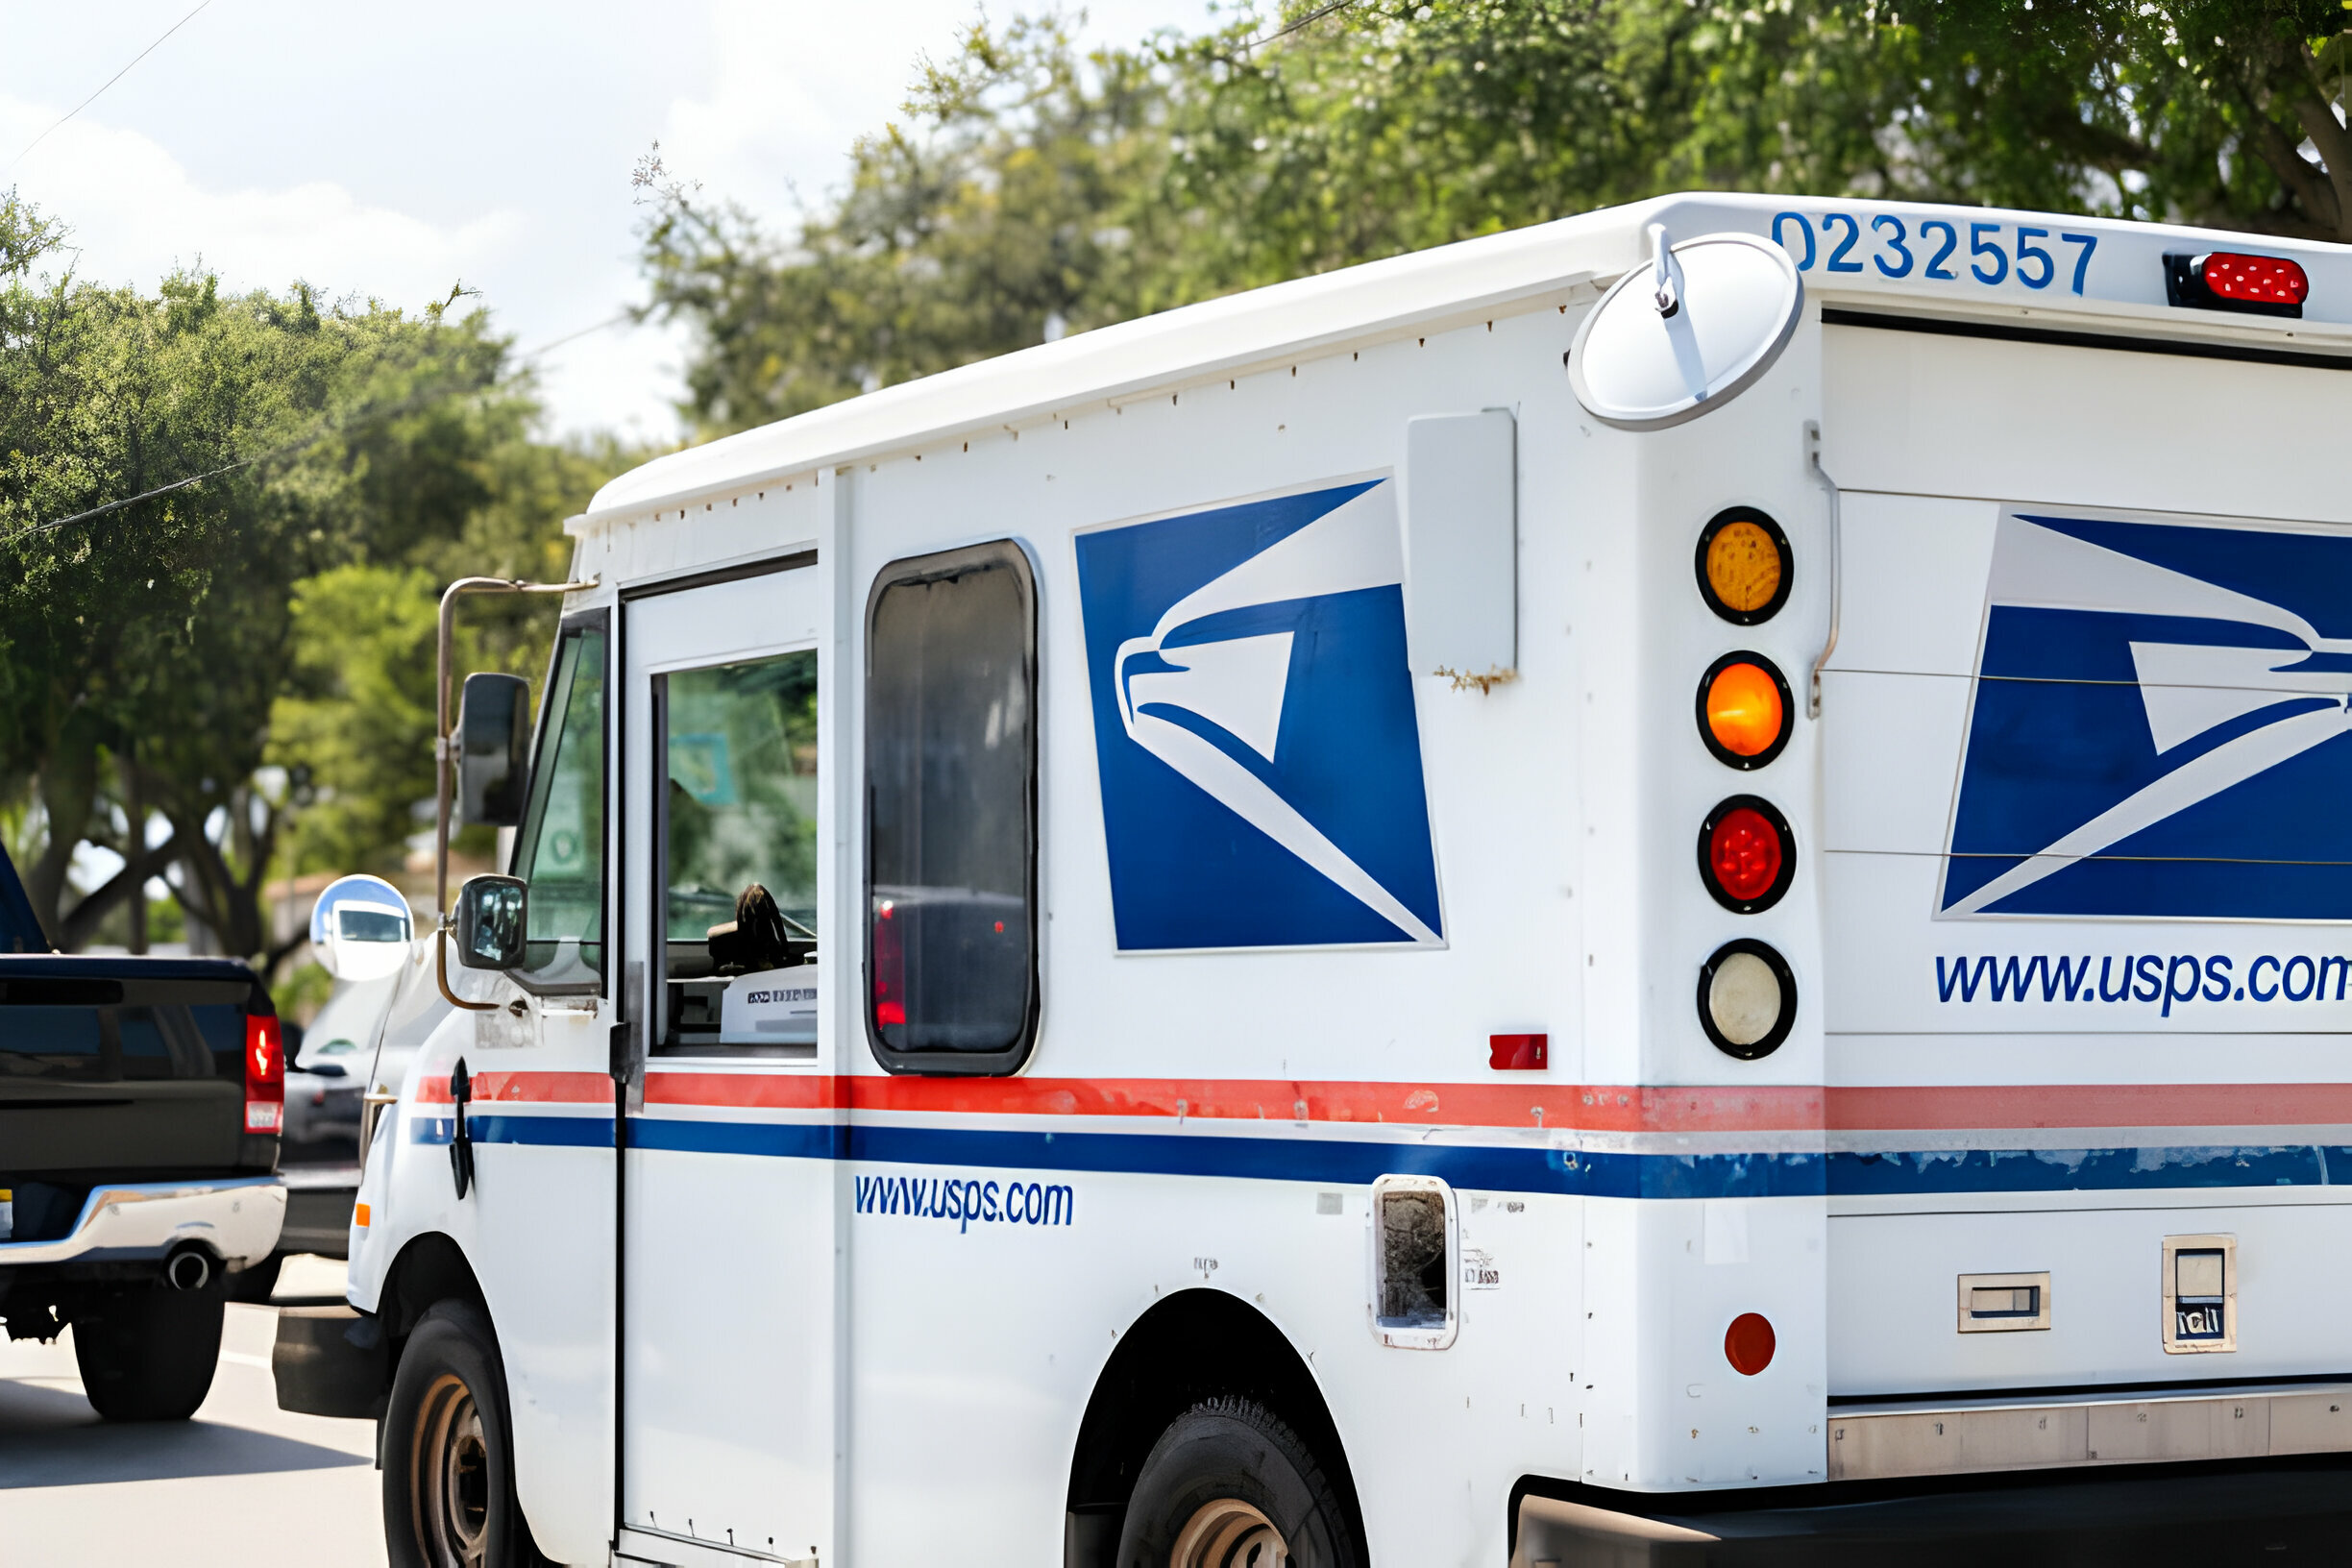 No Such Number USPS: What It Means and How to Resolve It